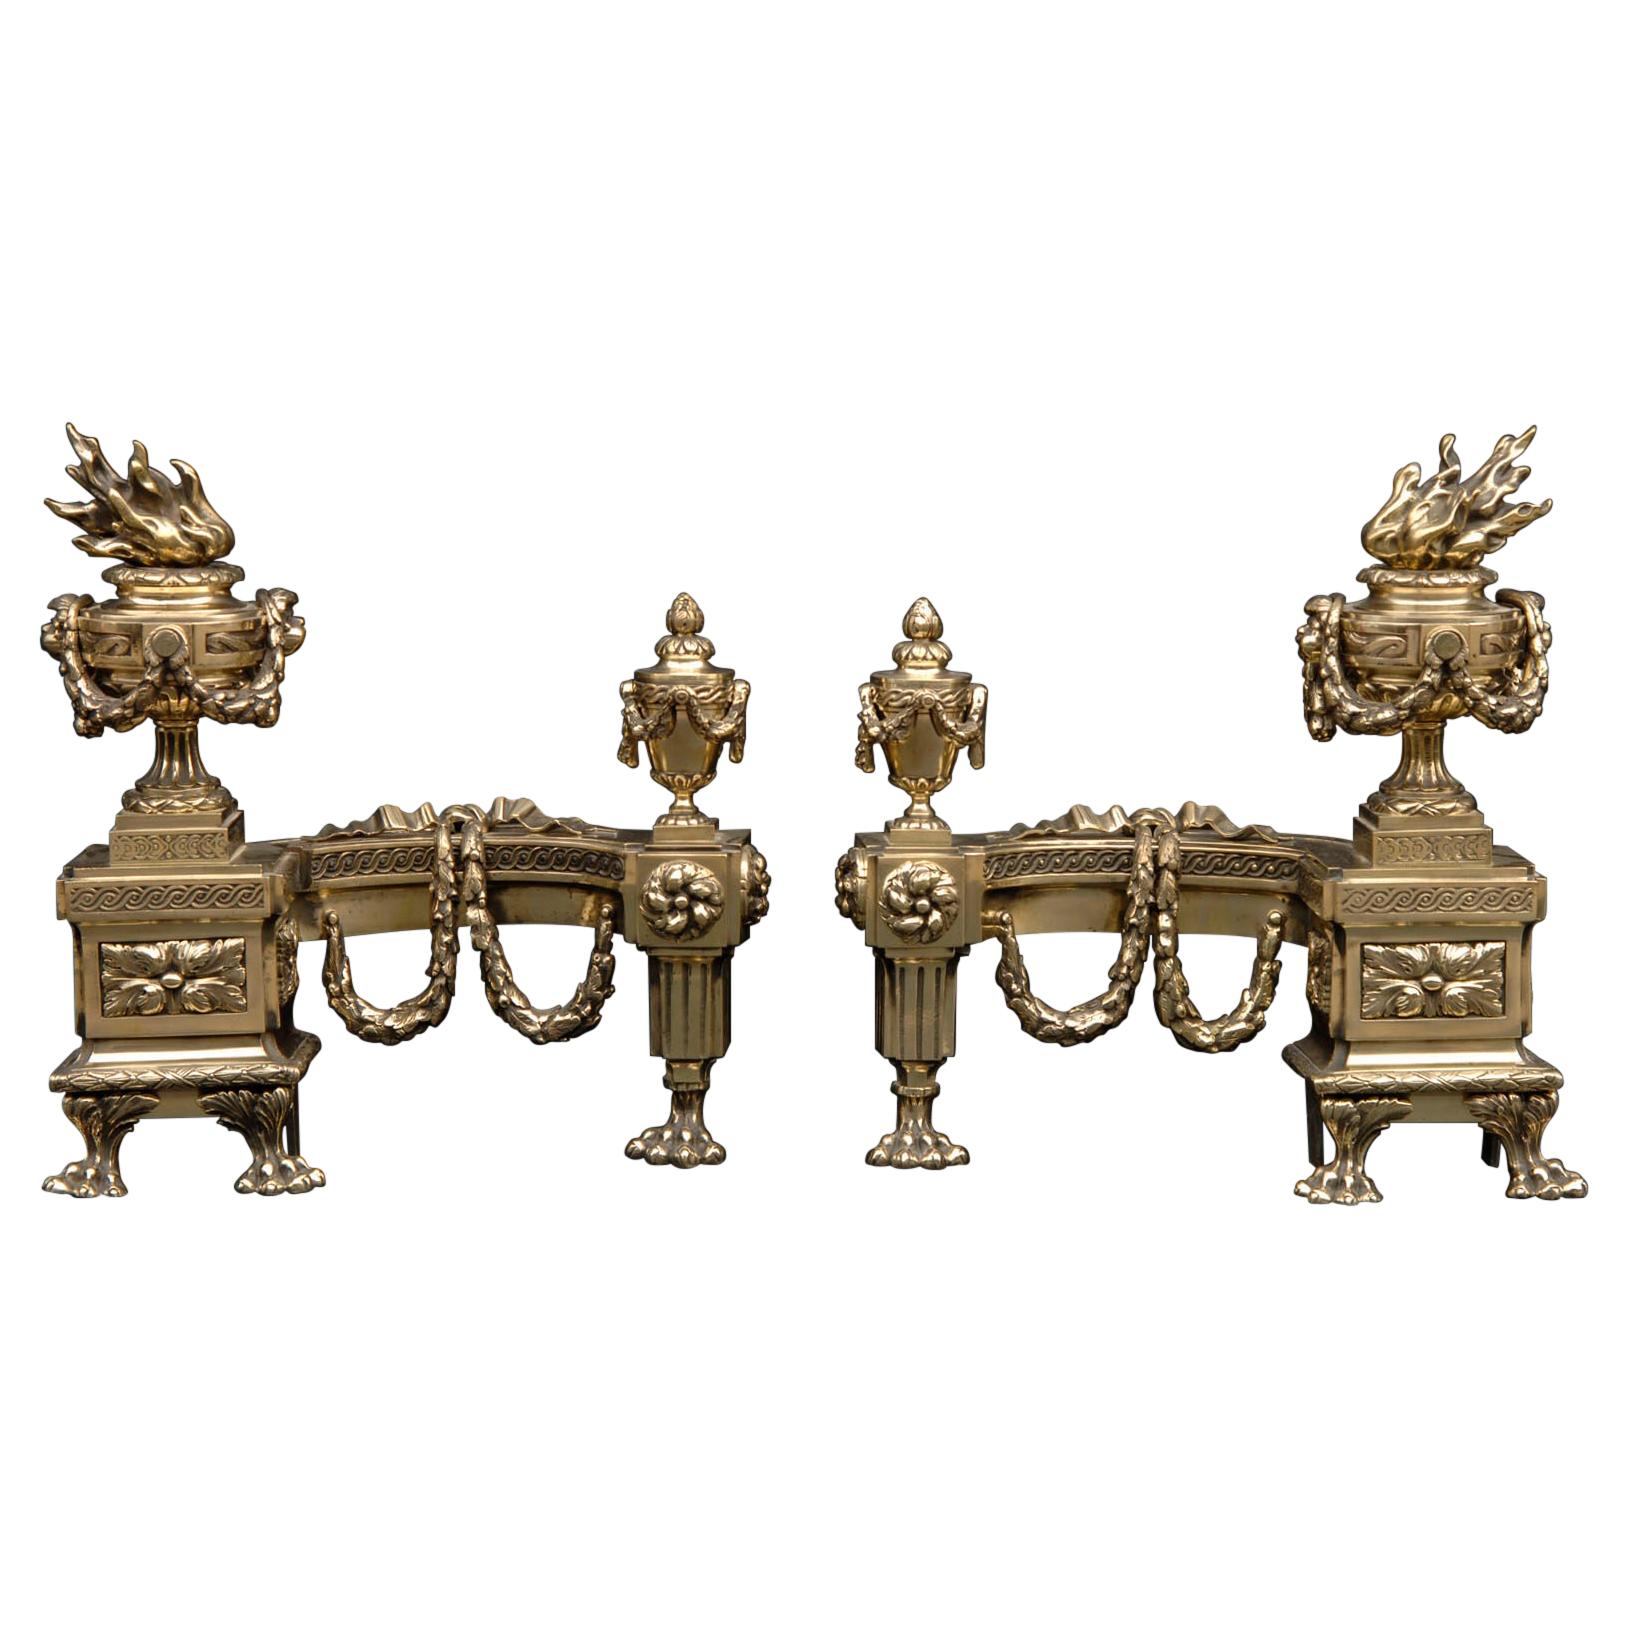 Very Fine Pair of Decorative Brass Chenets